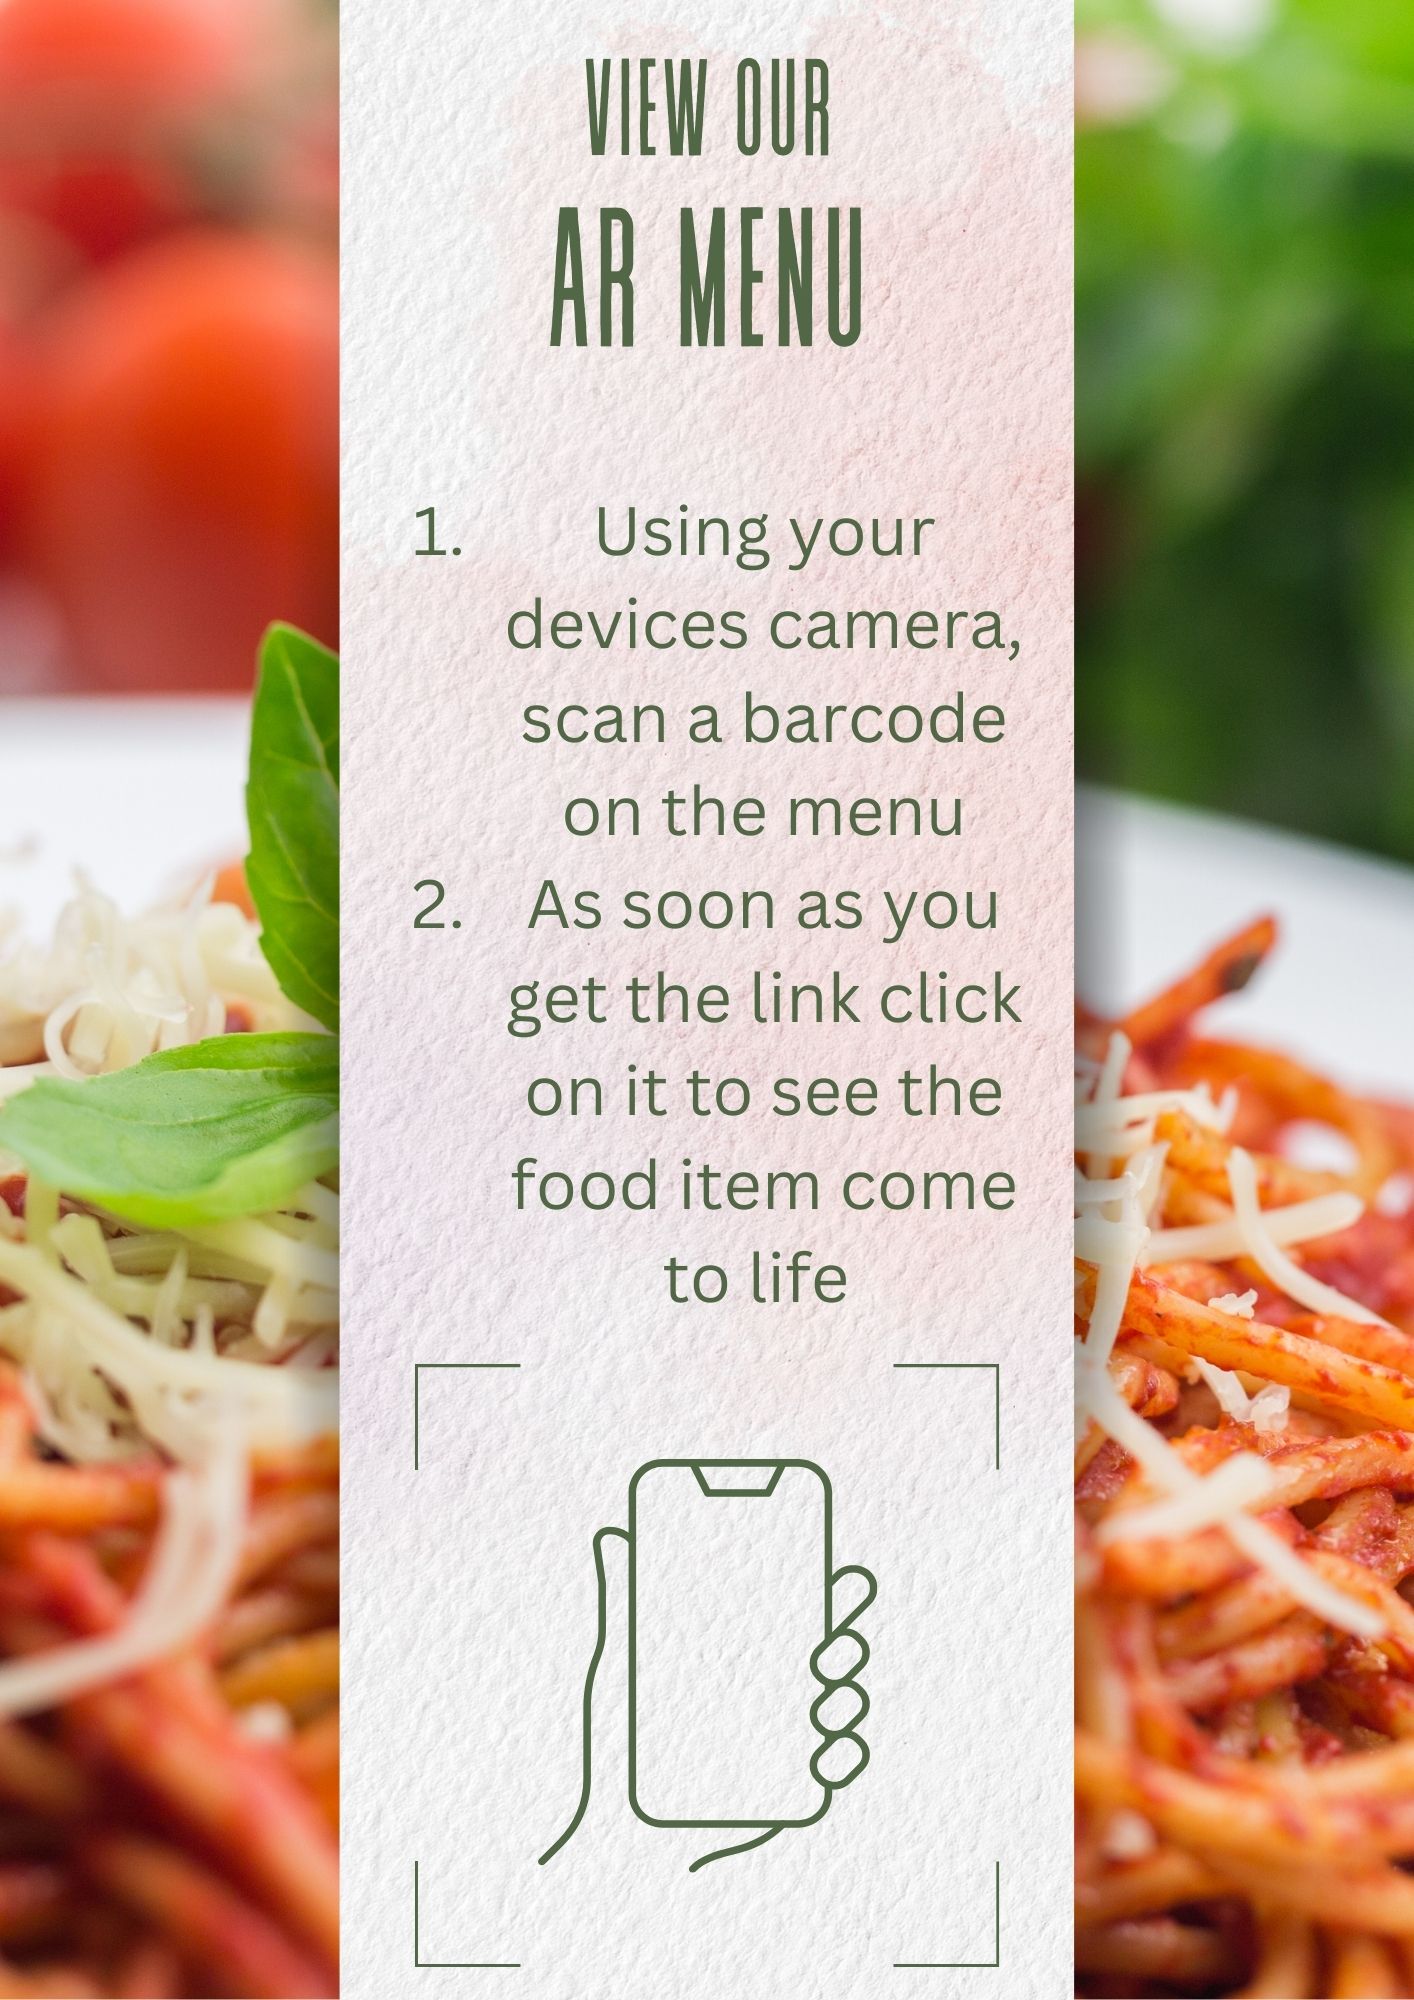 Instructions on how to use AR menu